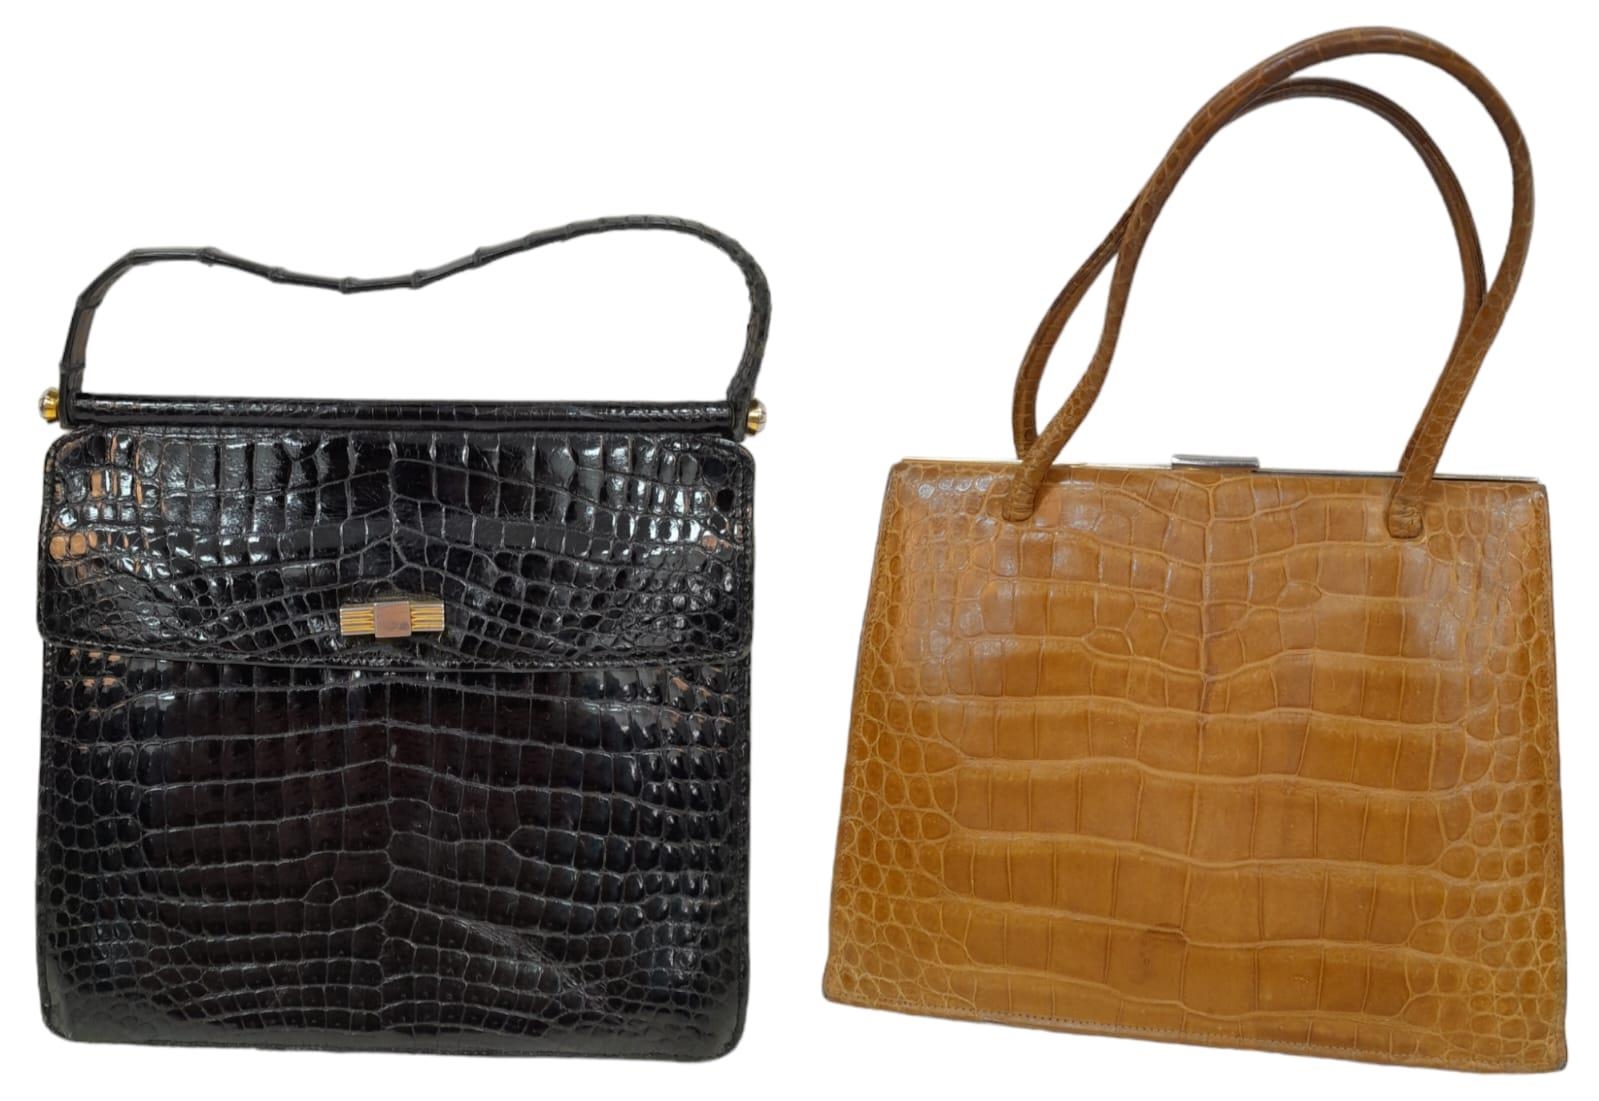 Two Crocodile Leather Hand Bags. Black crocodile bag has gold-toned hardware, a single strap and